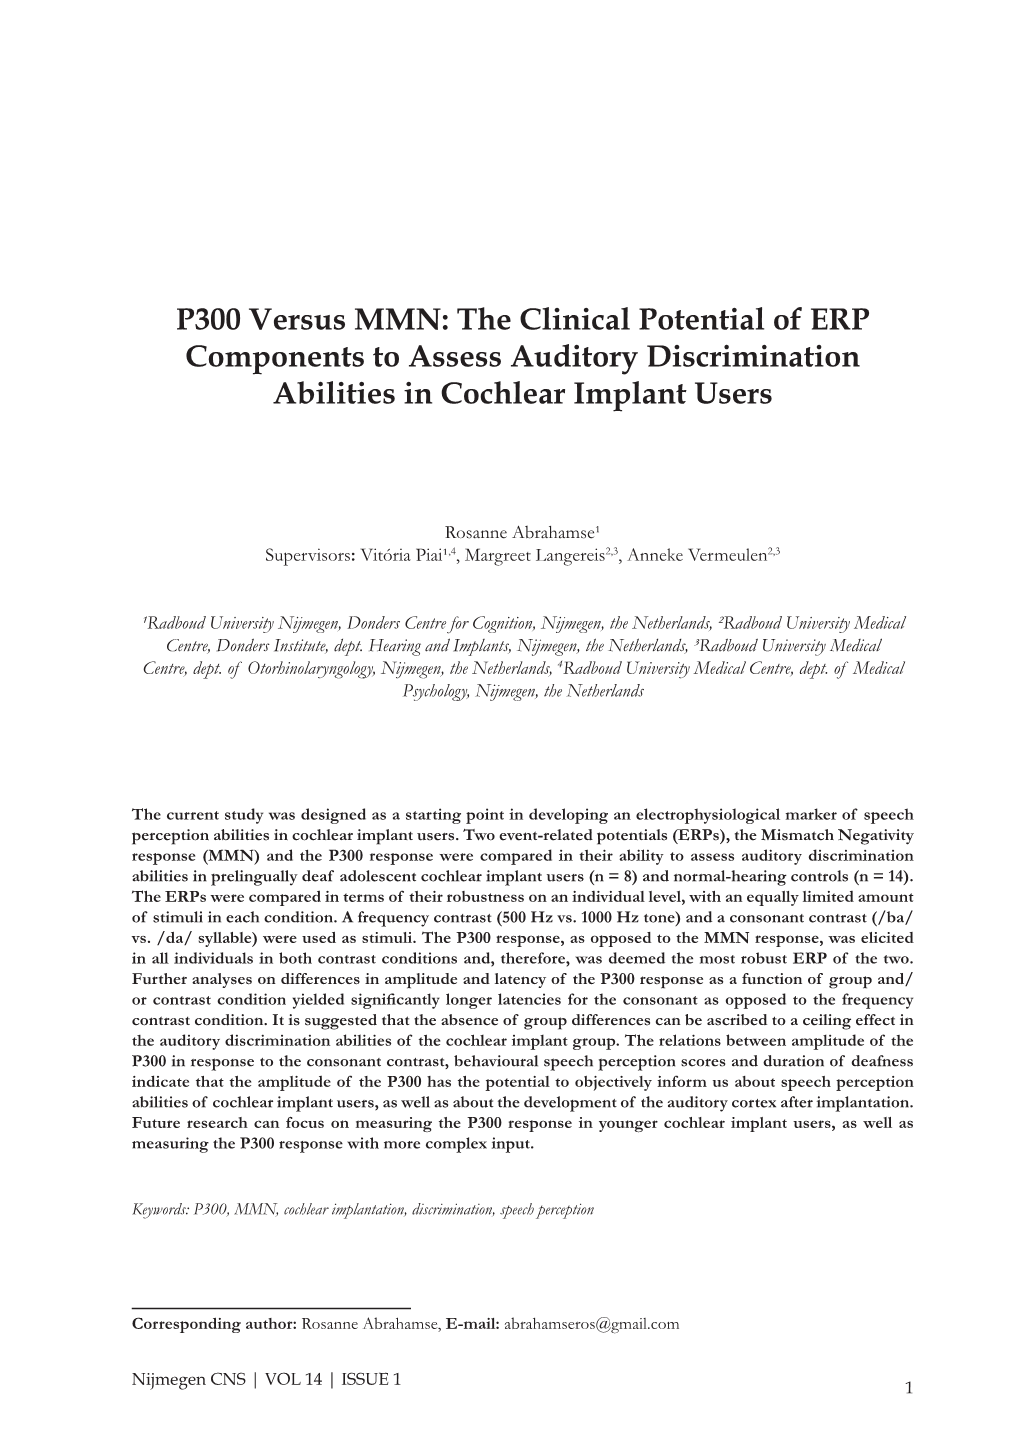 P300 Versus MMN: the Clinical Potential of ERP Components to Assess Auditory Discrimination Abilities in Cochlear Implant Users